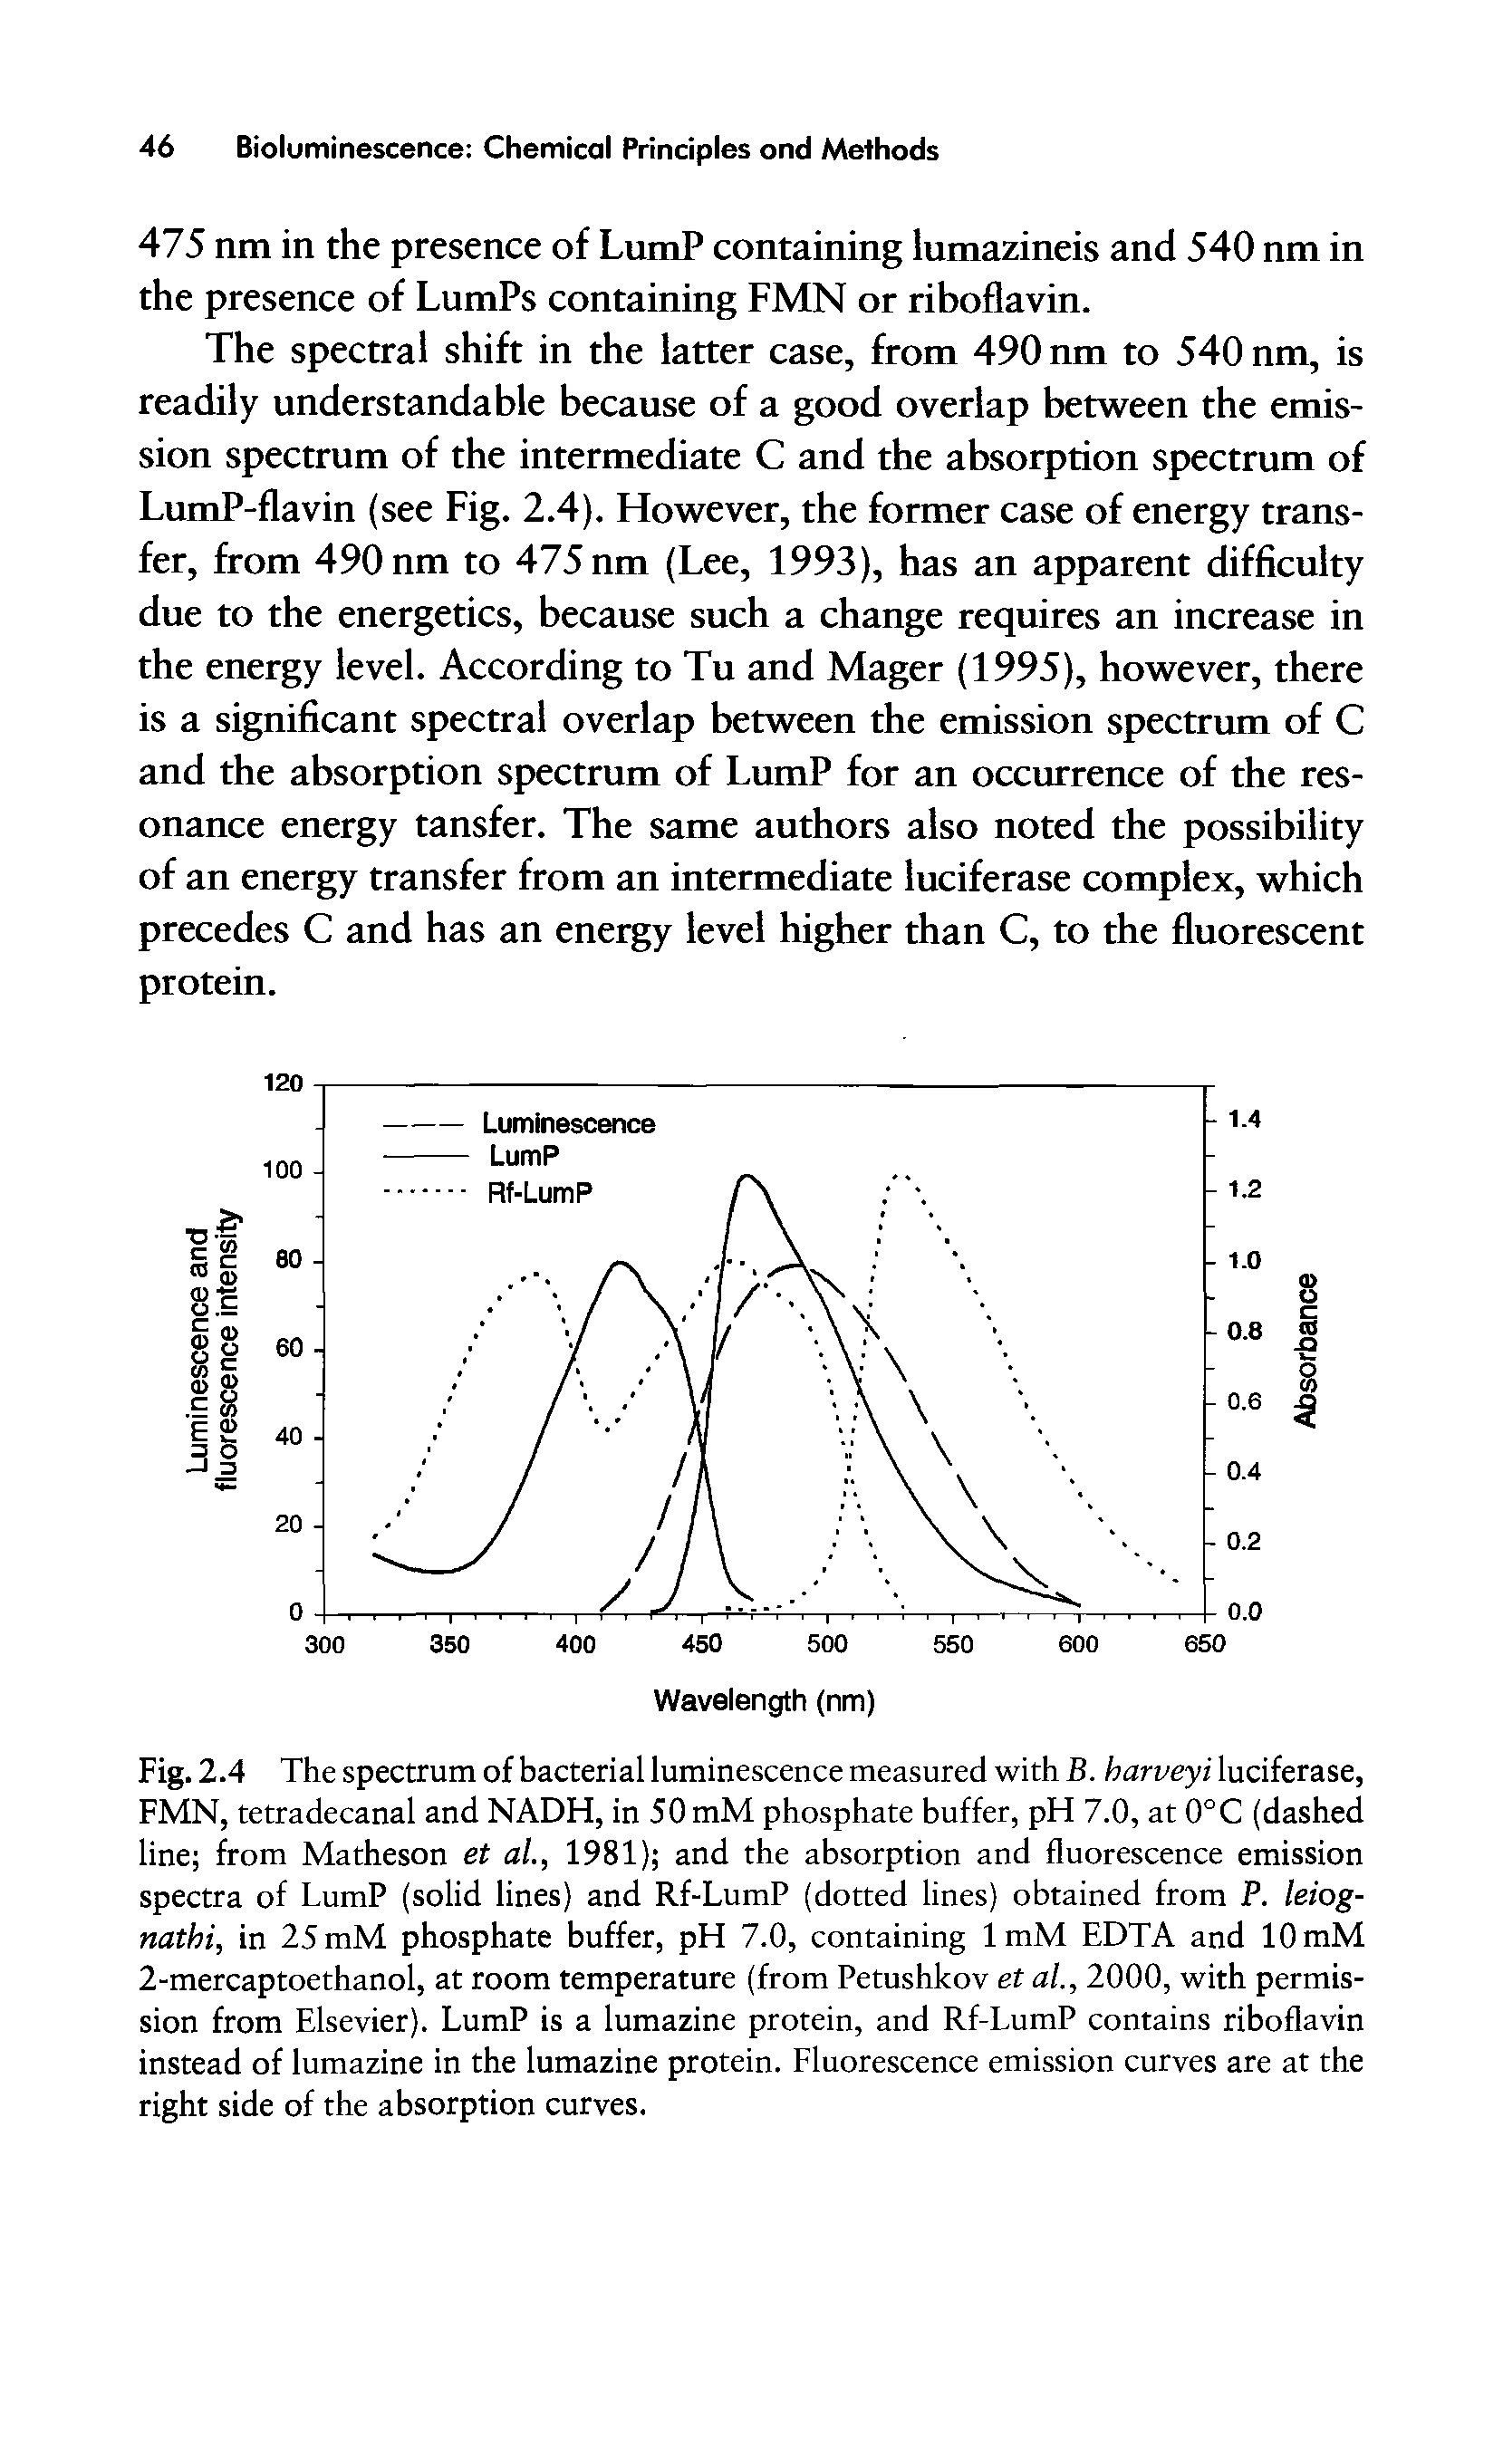 Fig. 2.4 The spectrum of bacterial luminescence measured with B. harveyi luciferase, FMN, tetradecanal and NADH, in 50 mM phosphate buffer, pH 7.0, at 0°C (dashed line from Matheson et al., 1981) and the absorption and fluorescence emission spectra of LumP (solid lines) and Rf-LumP (dotted lines) obtained from P. leiog-natbi, in 25 mM phosphate buffer, pH 7.0, containing 1 mM EDTA and 10 mM 2-mercaptoethanol, at room temperature (from Petushkov et al, 2000, with permission from Elsevier). LumP is a lumazine protein, and Rf-LumP contains riboflavin instead of lumazine in the lumazine protein. Fluorescence emission curves are at the right side of the absorption curves.